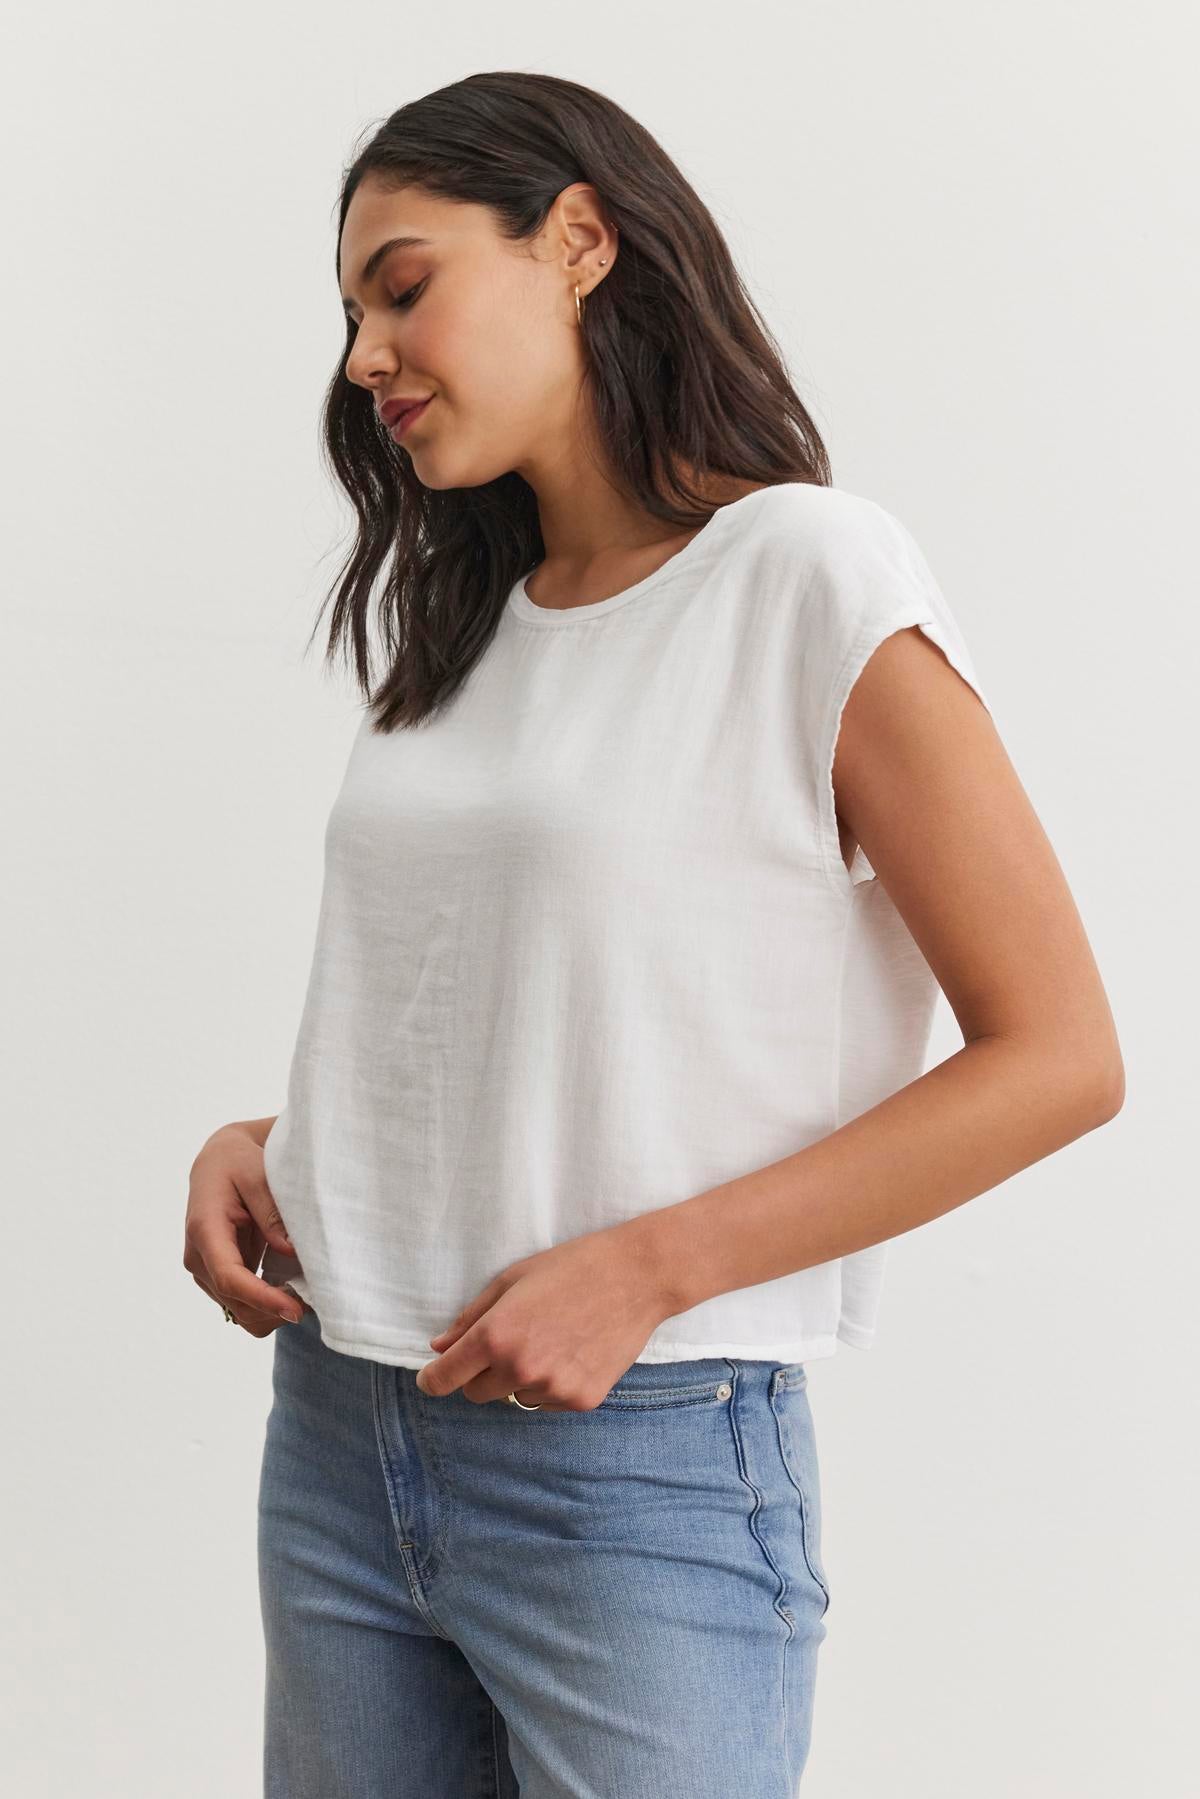   A woman with long dark hair wearing a white DANIELLA CREW NECK TEE by Velvet by Graham & Spencer and blue jeans, showcasing a casual basic look, stands against a plain, light-colored background. The lightweight cotton woven fabric of her cropped silhouette shirt complements her style effortlessly. 